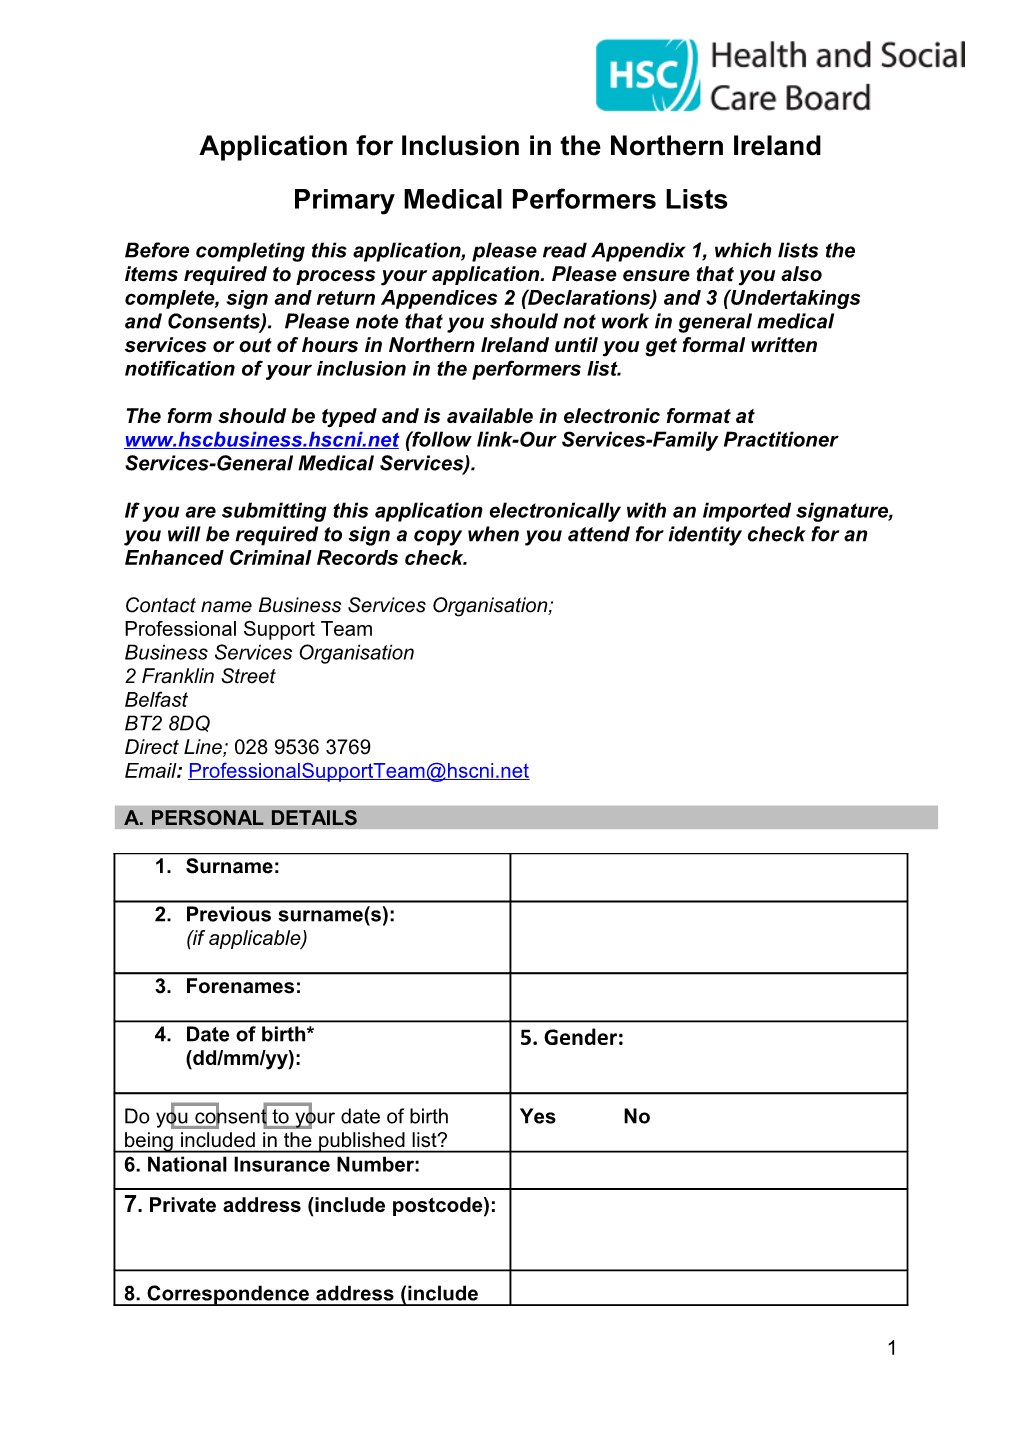 Application for Inclusion in the Northern Ireland